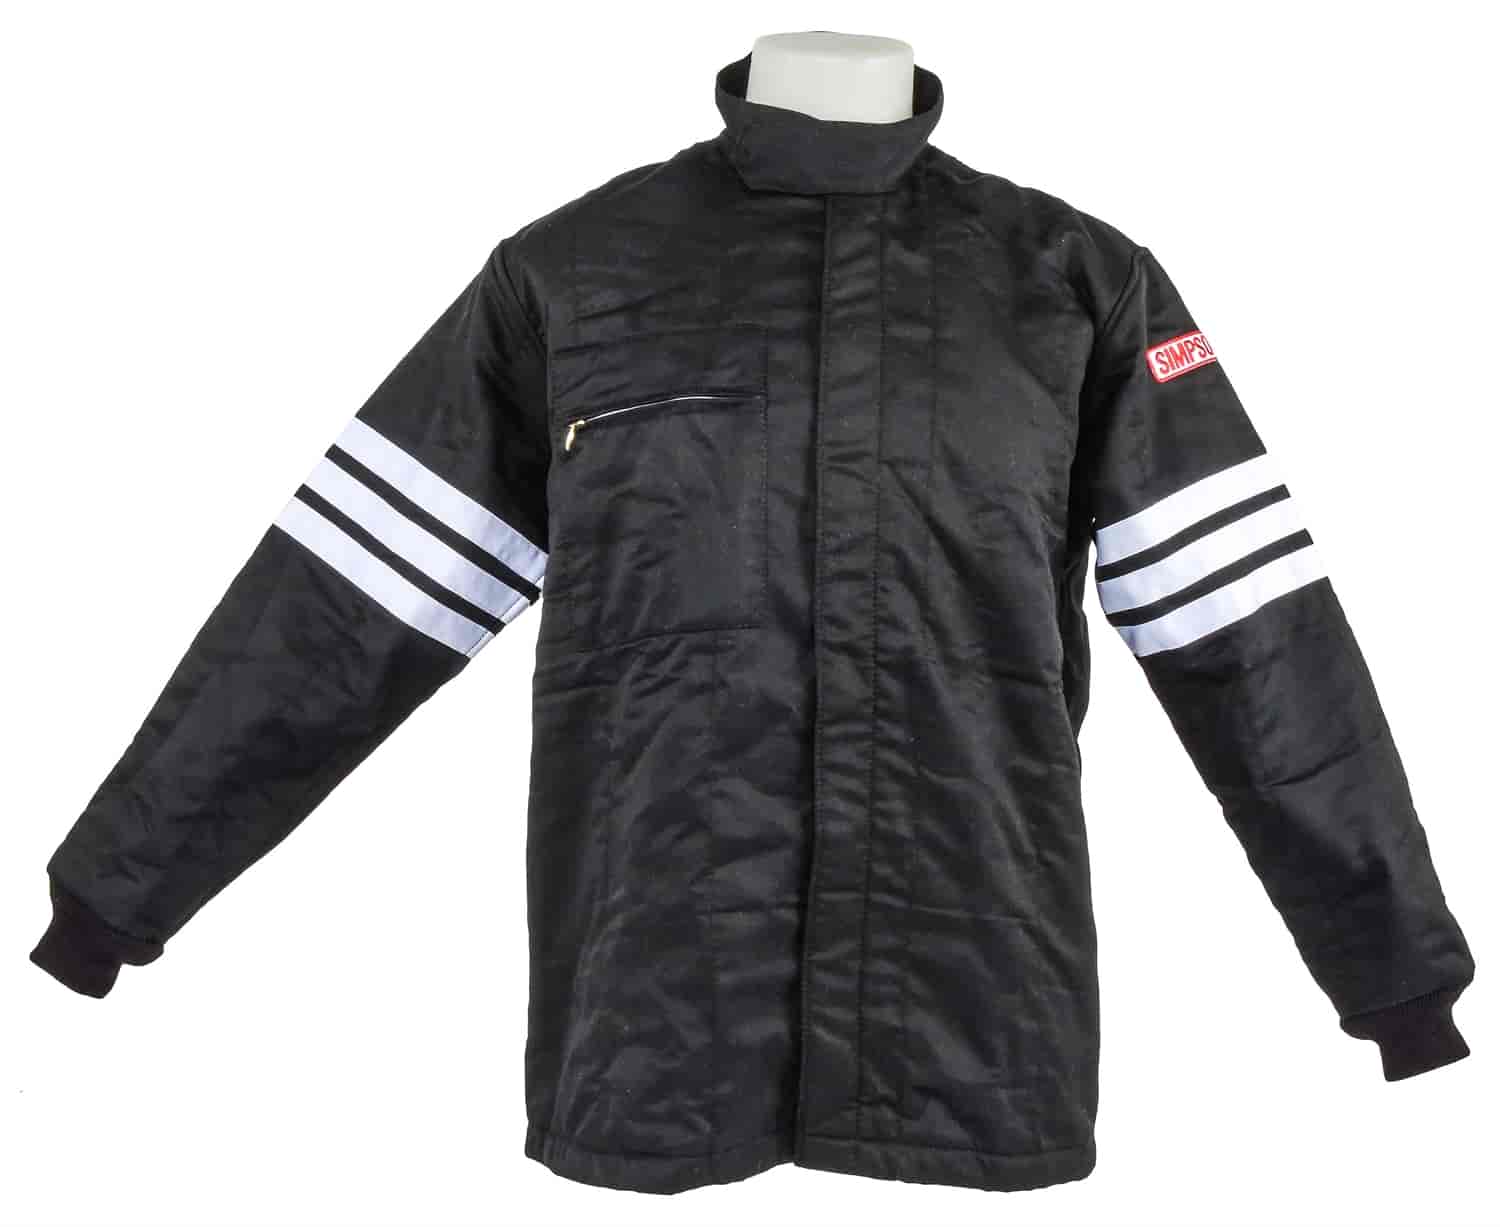 Classic 3-Stripe Jacket SFI 3.2A/1 Rated